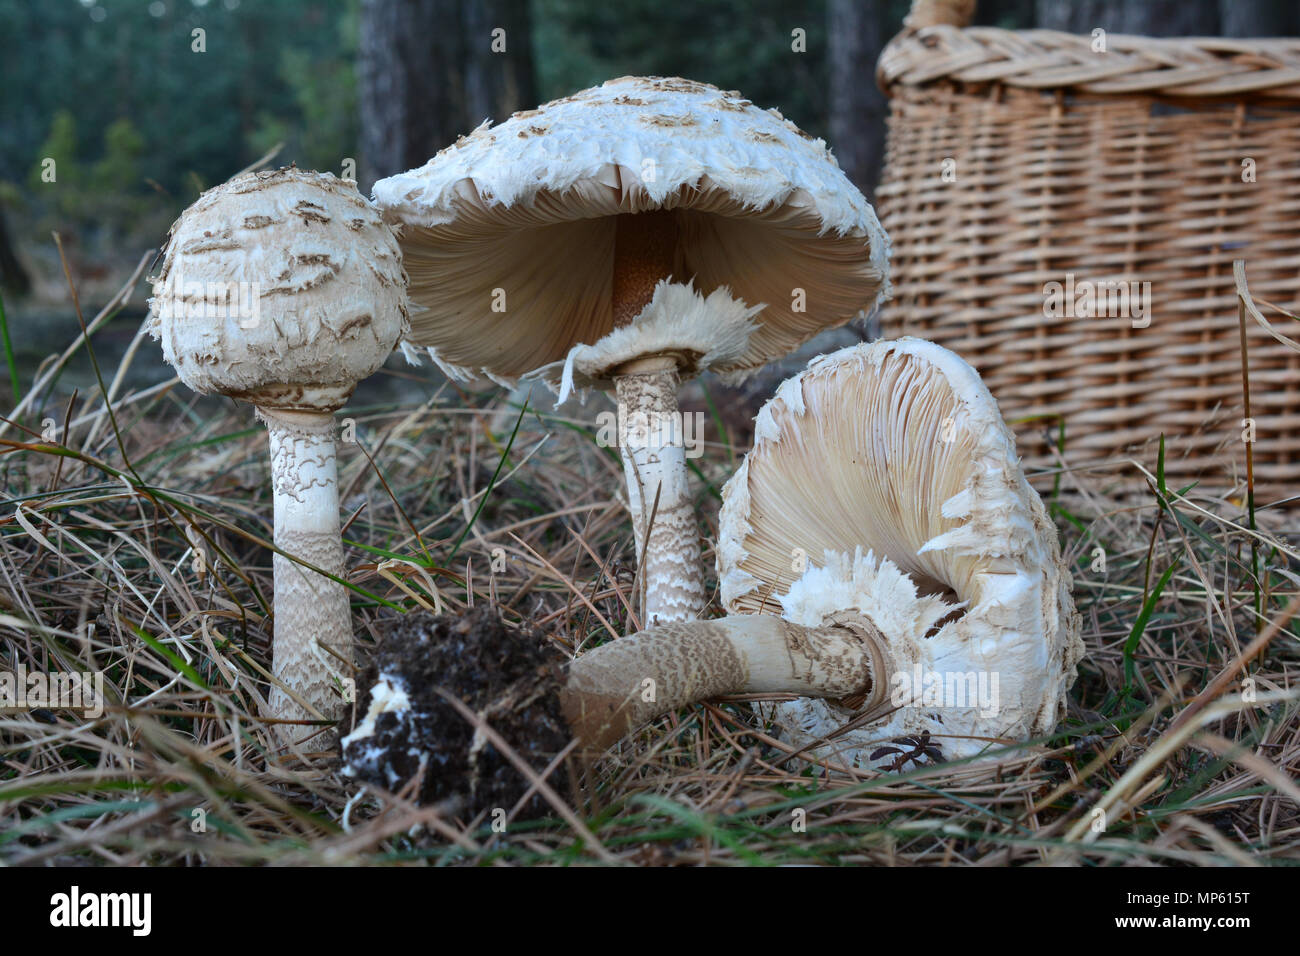 Small group of three Parasol mushrooms or Macrolepiota procera mushrooms in a meadow on the edge of the pine forest with wicker basked in background Stock Photo